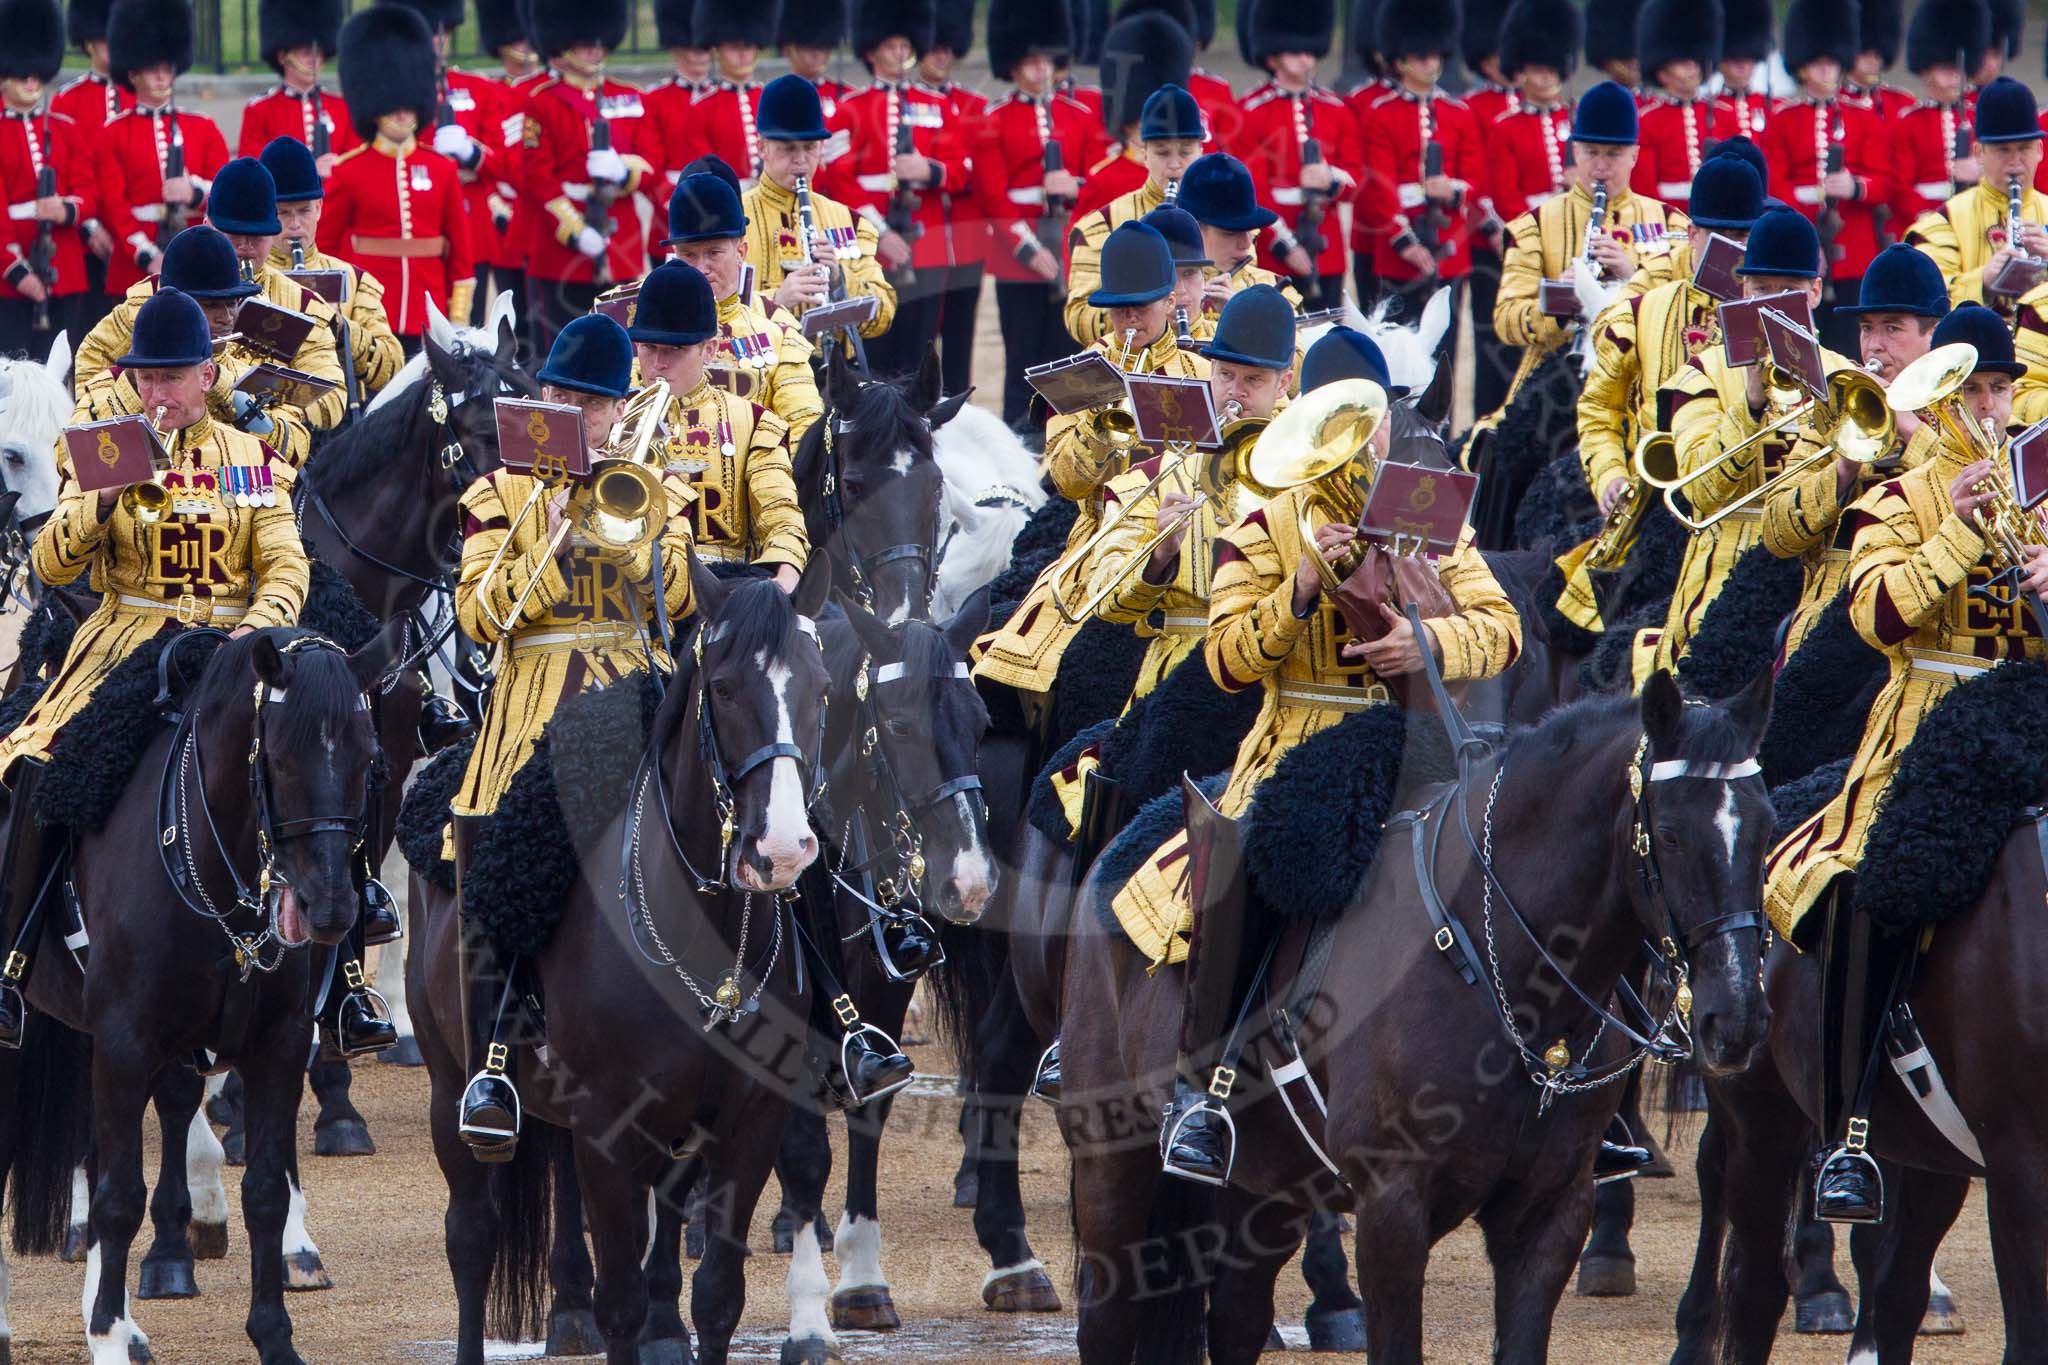 Trooping the Colour 2014.
Horse Guards Parade, Westminster,
London SW1A,

United Kingdom,
on 14 June 2014 at 11:56, image #769